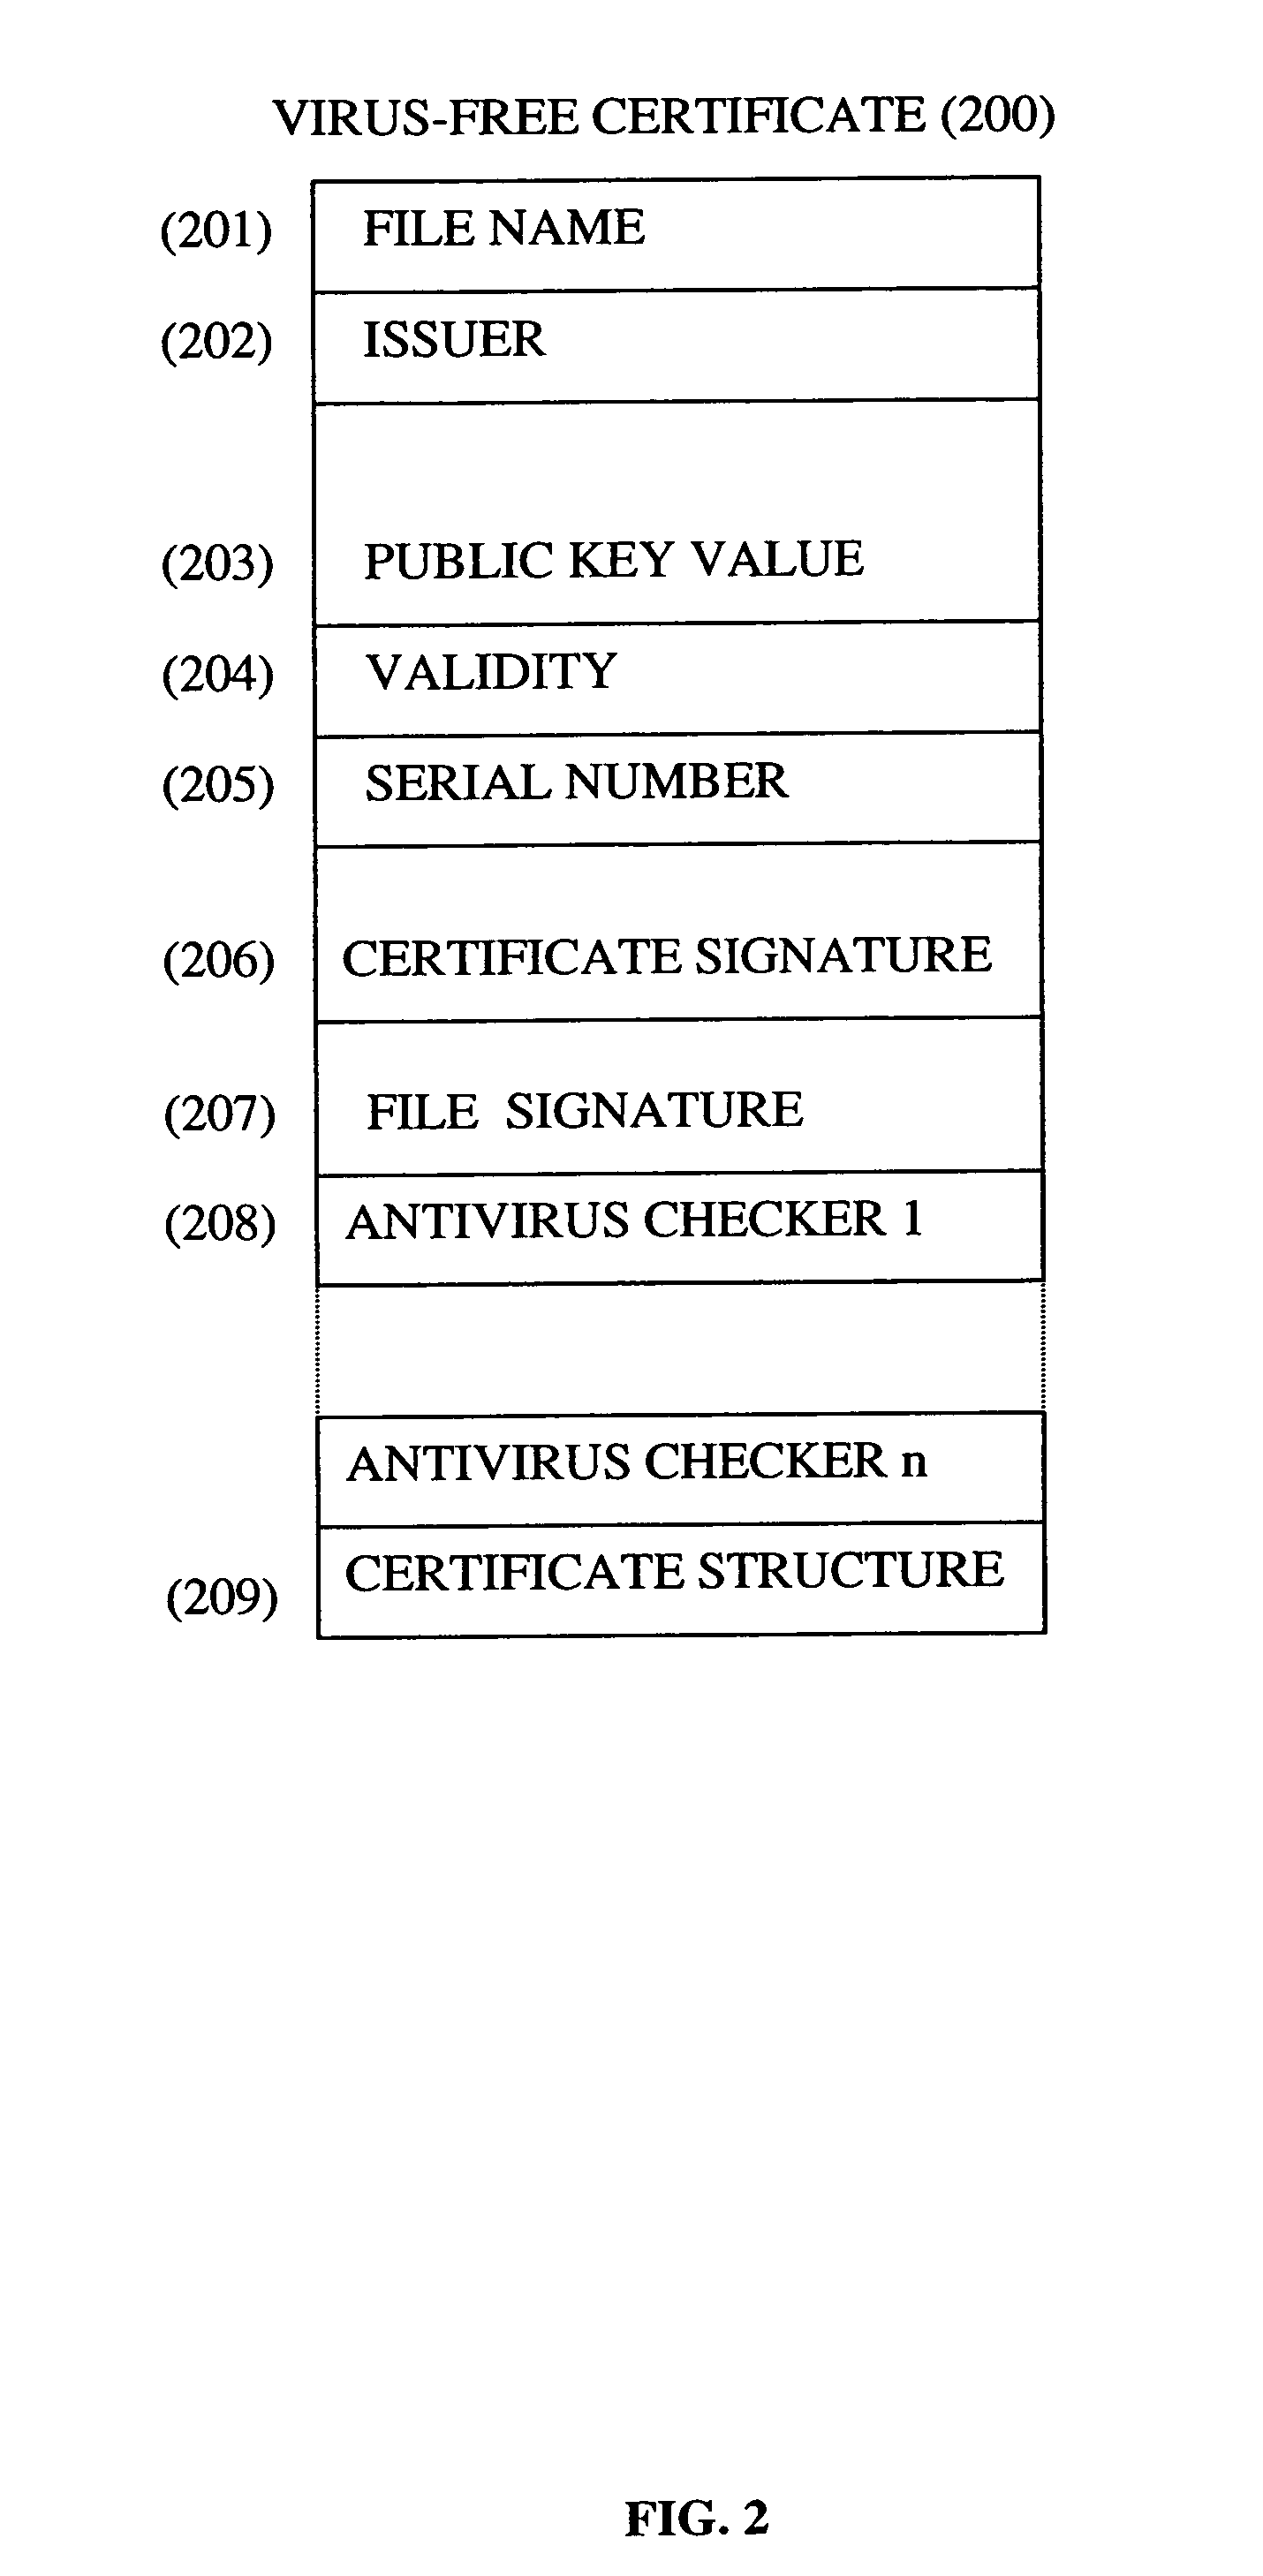 Method and system for retrieving an anti-virus signature from one or a plurality of virus-free certificate authorities